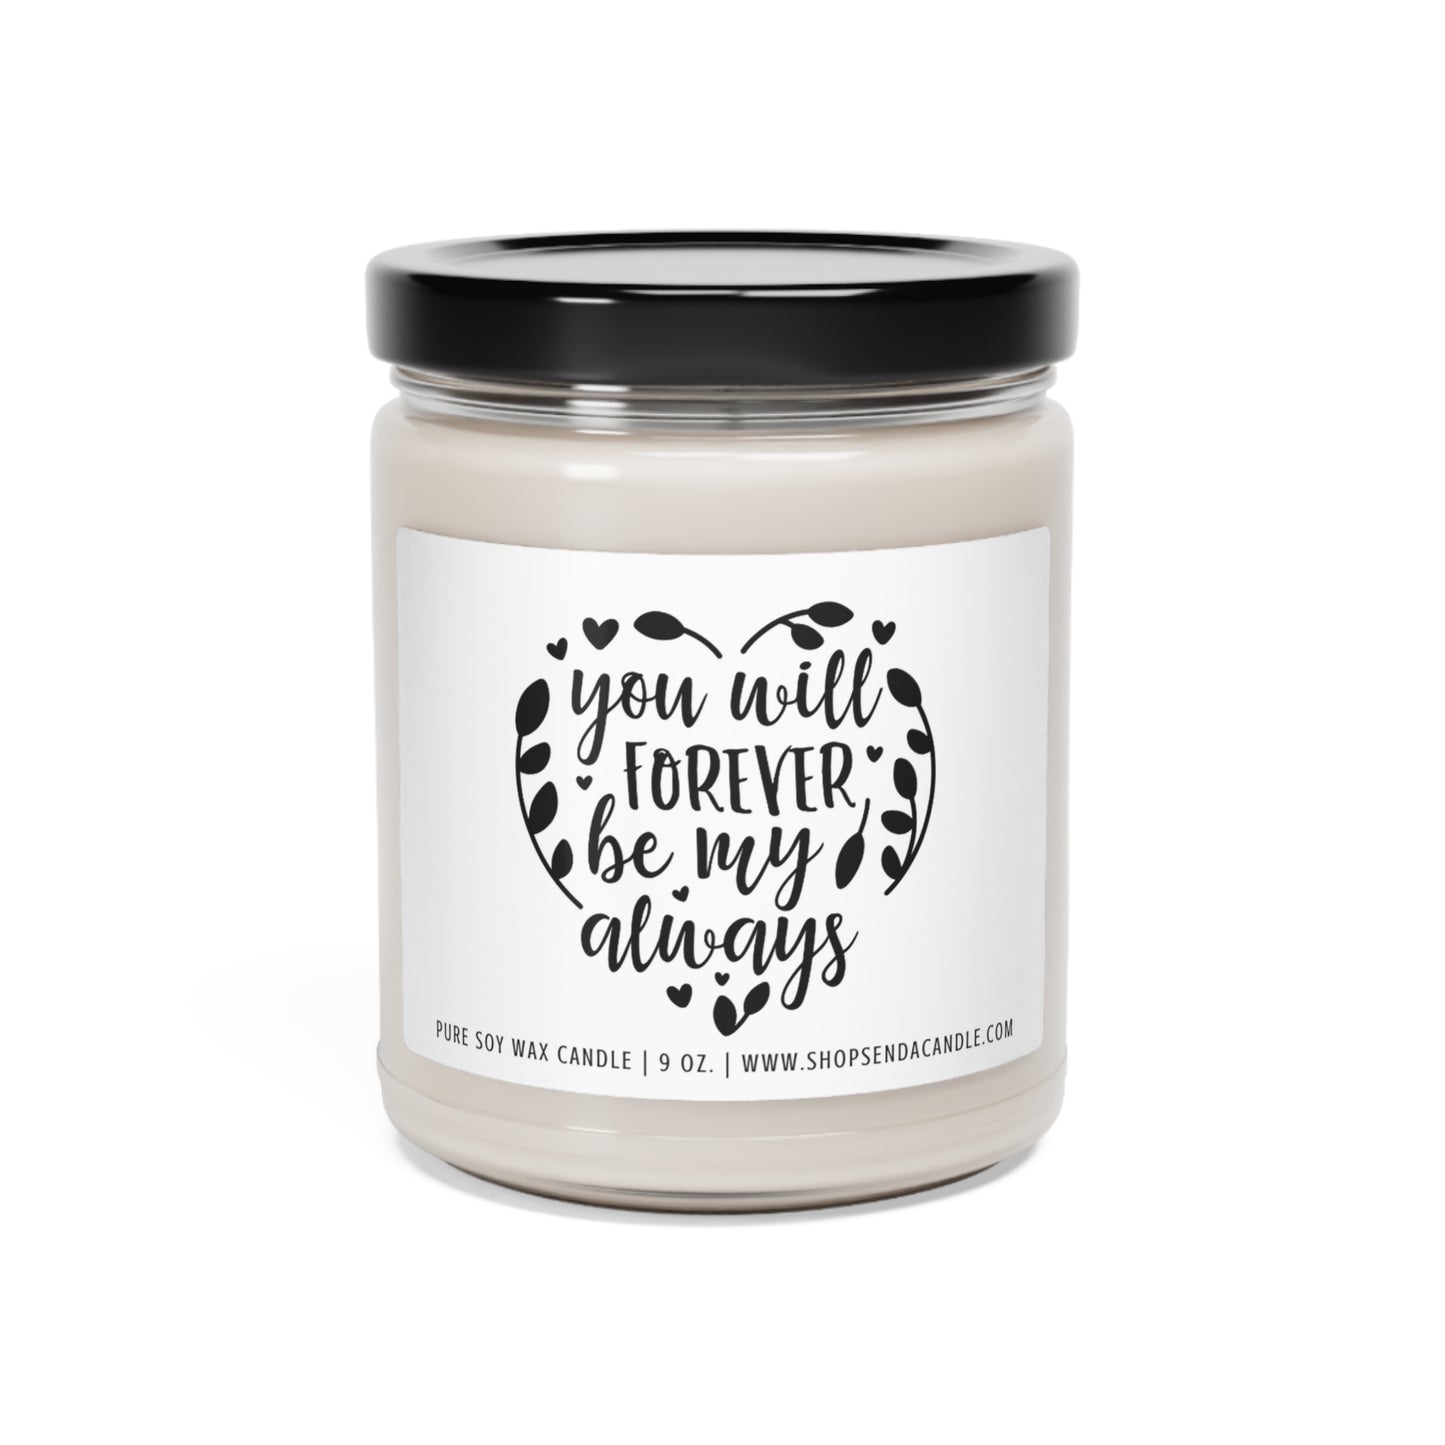 15 Year Anniversary Gifts | Send A Candle